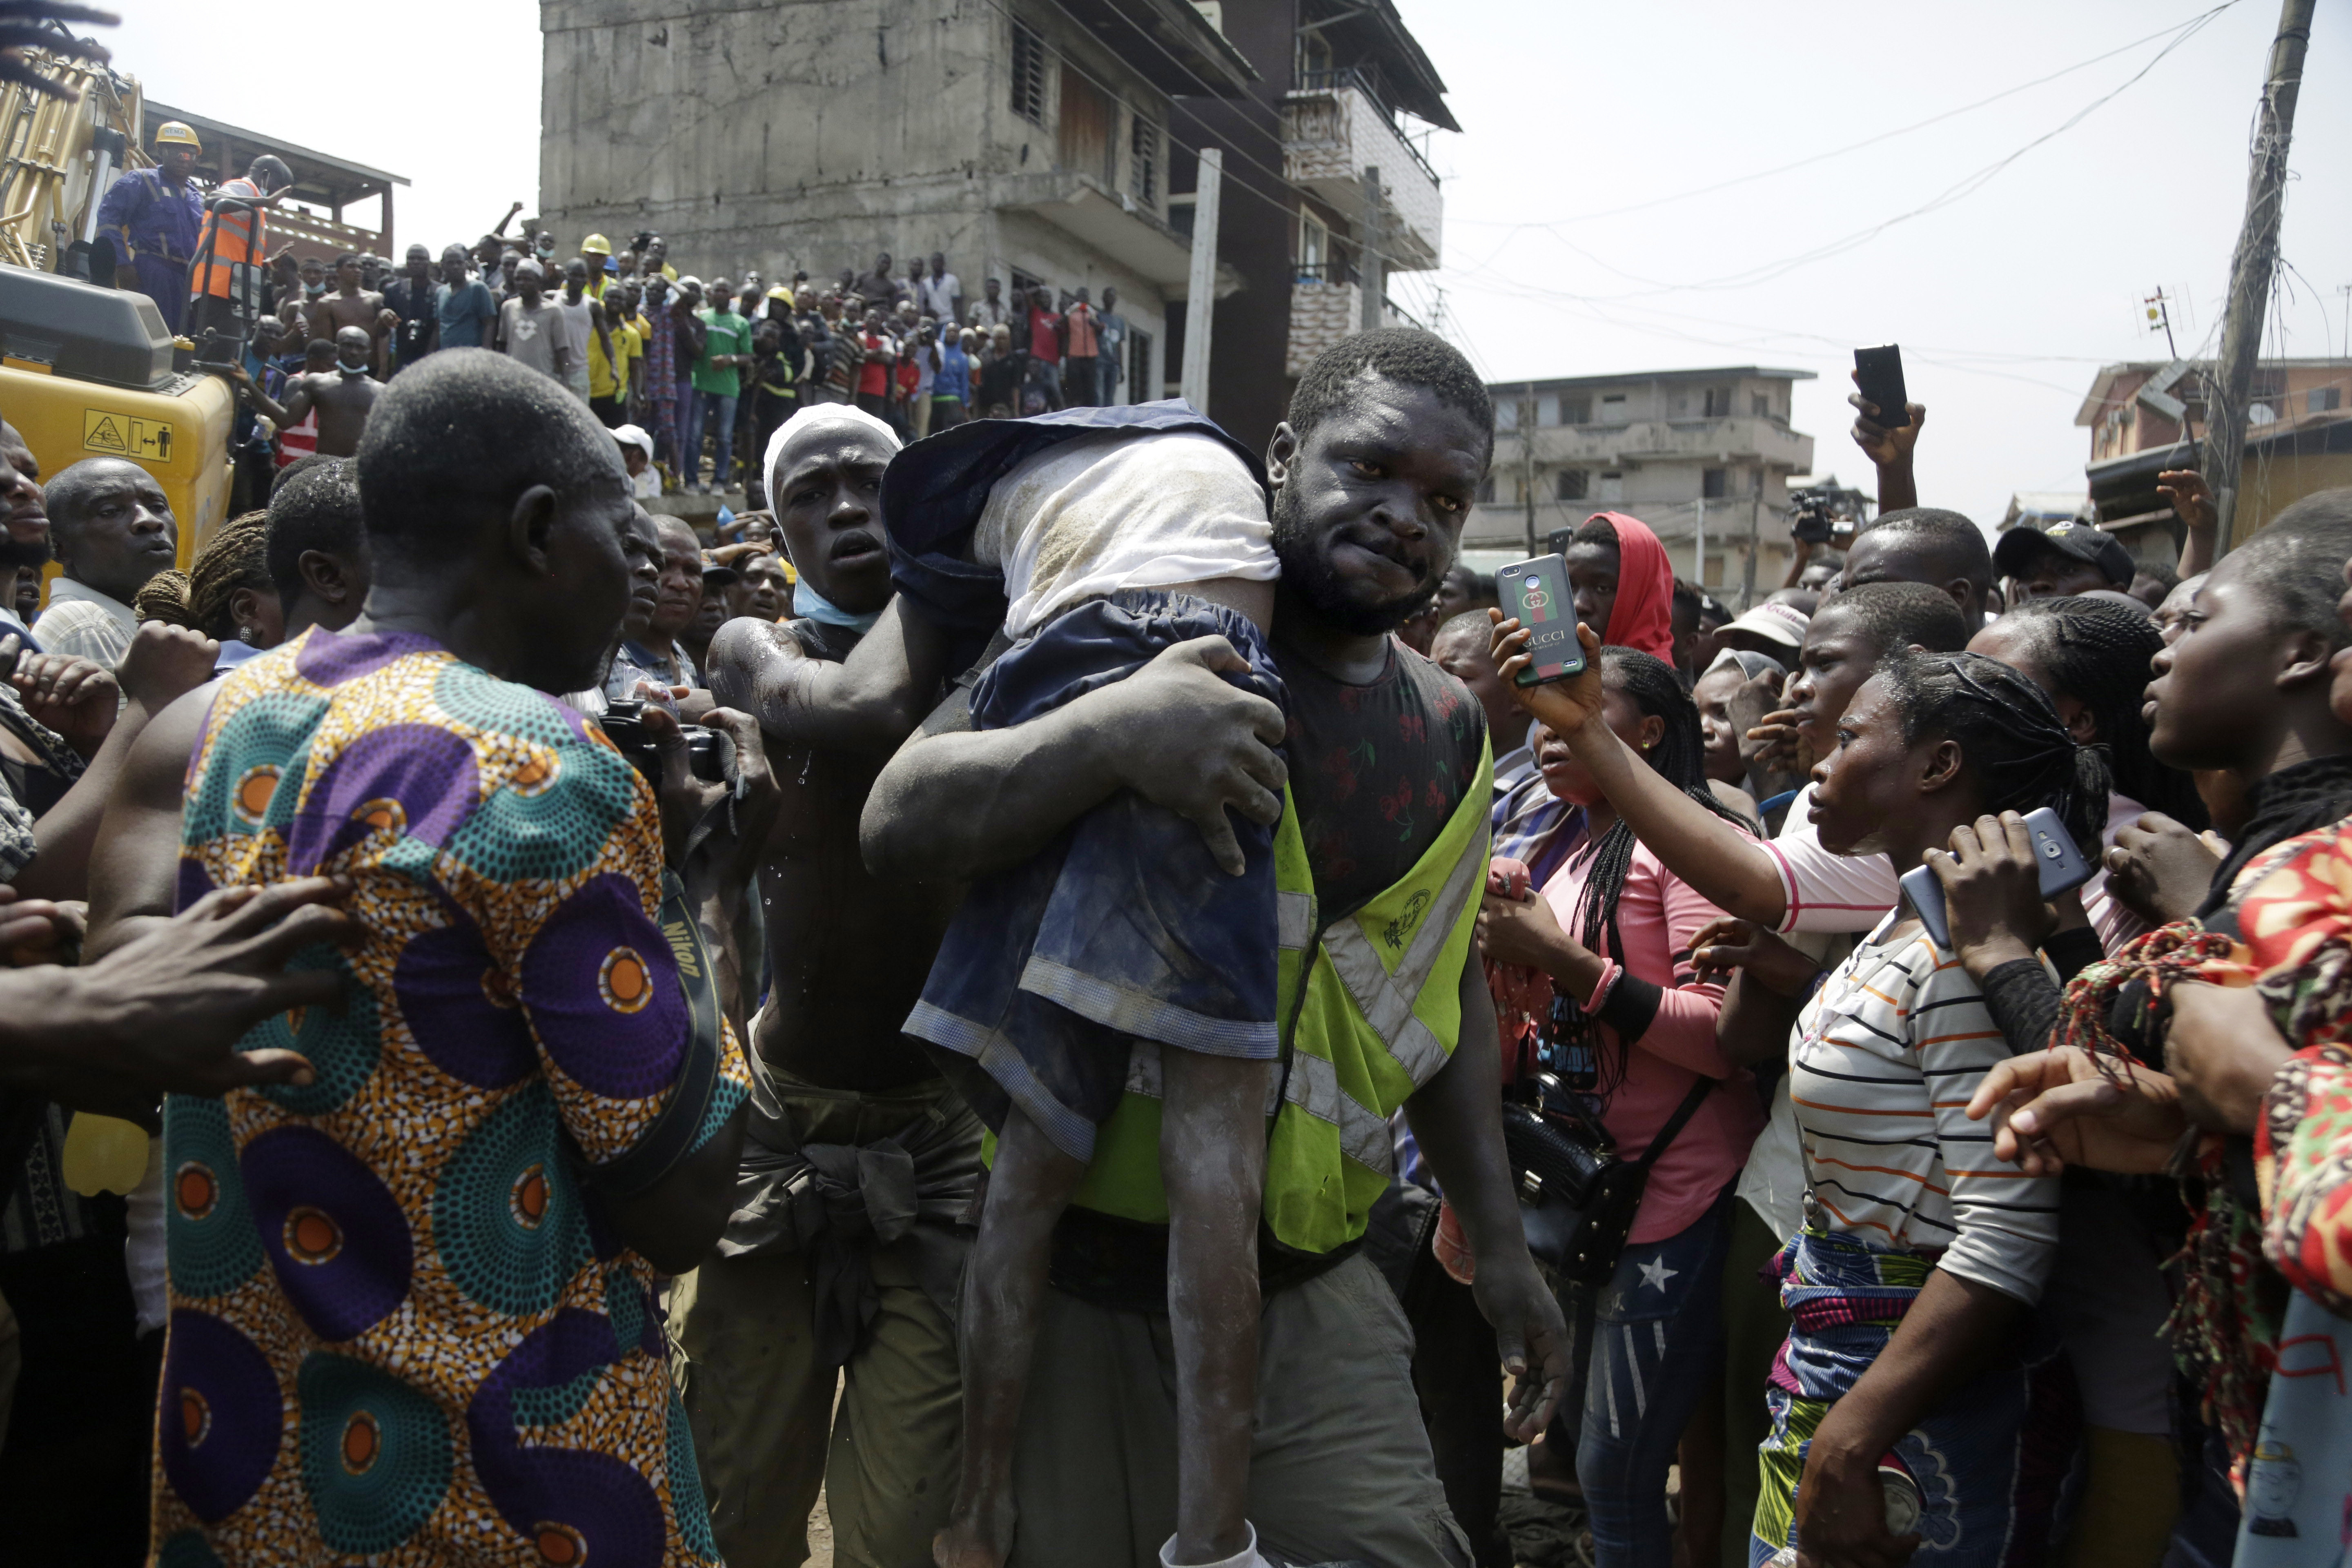 20 dead, mostly children, in Nigeria building collapse